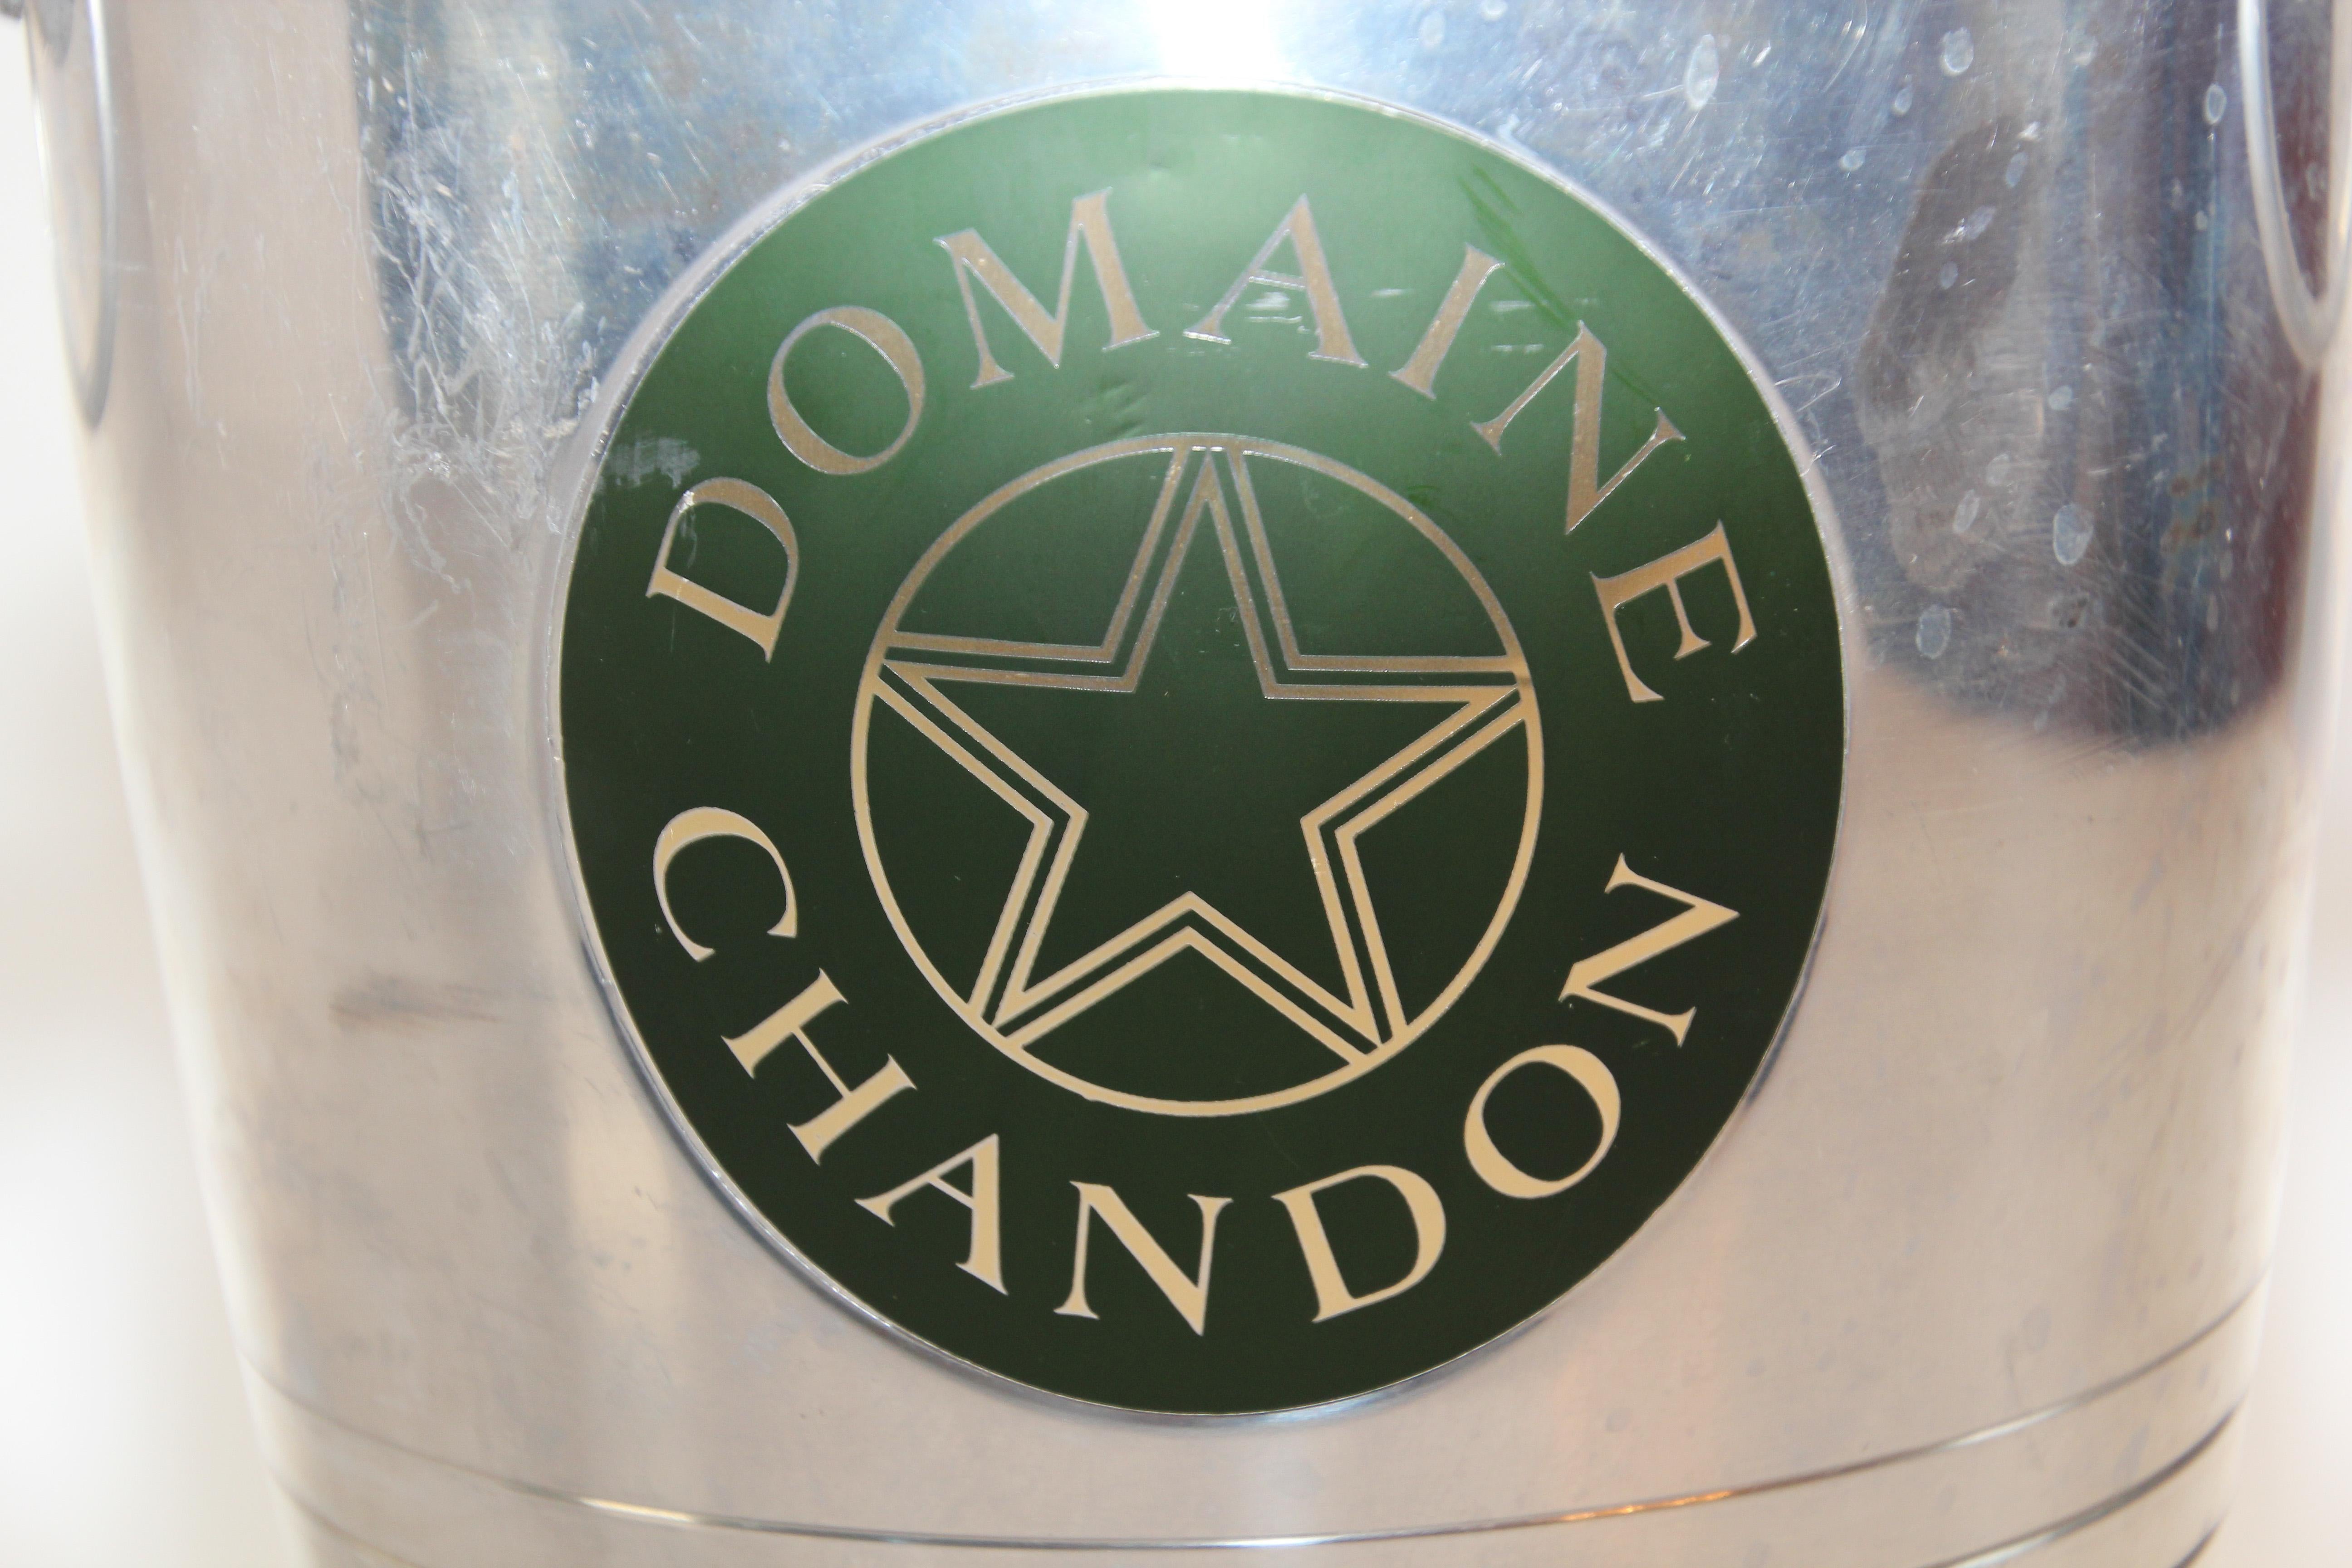 French Vintage Domaine Chandon Champagne Ice Bucket Cooler 2